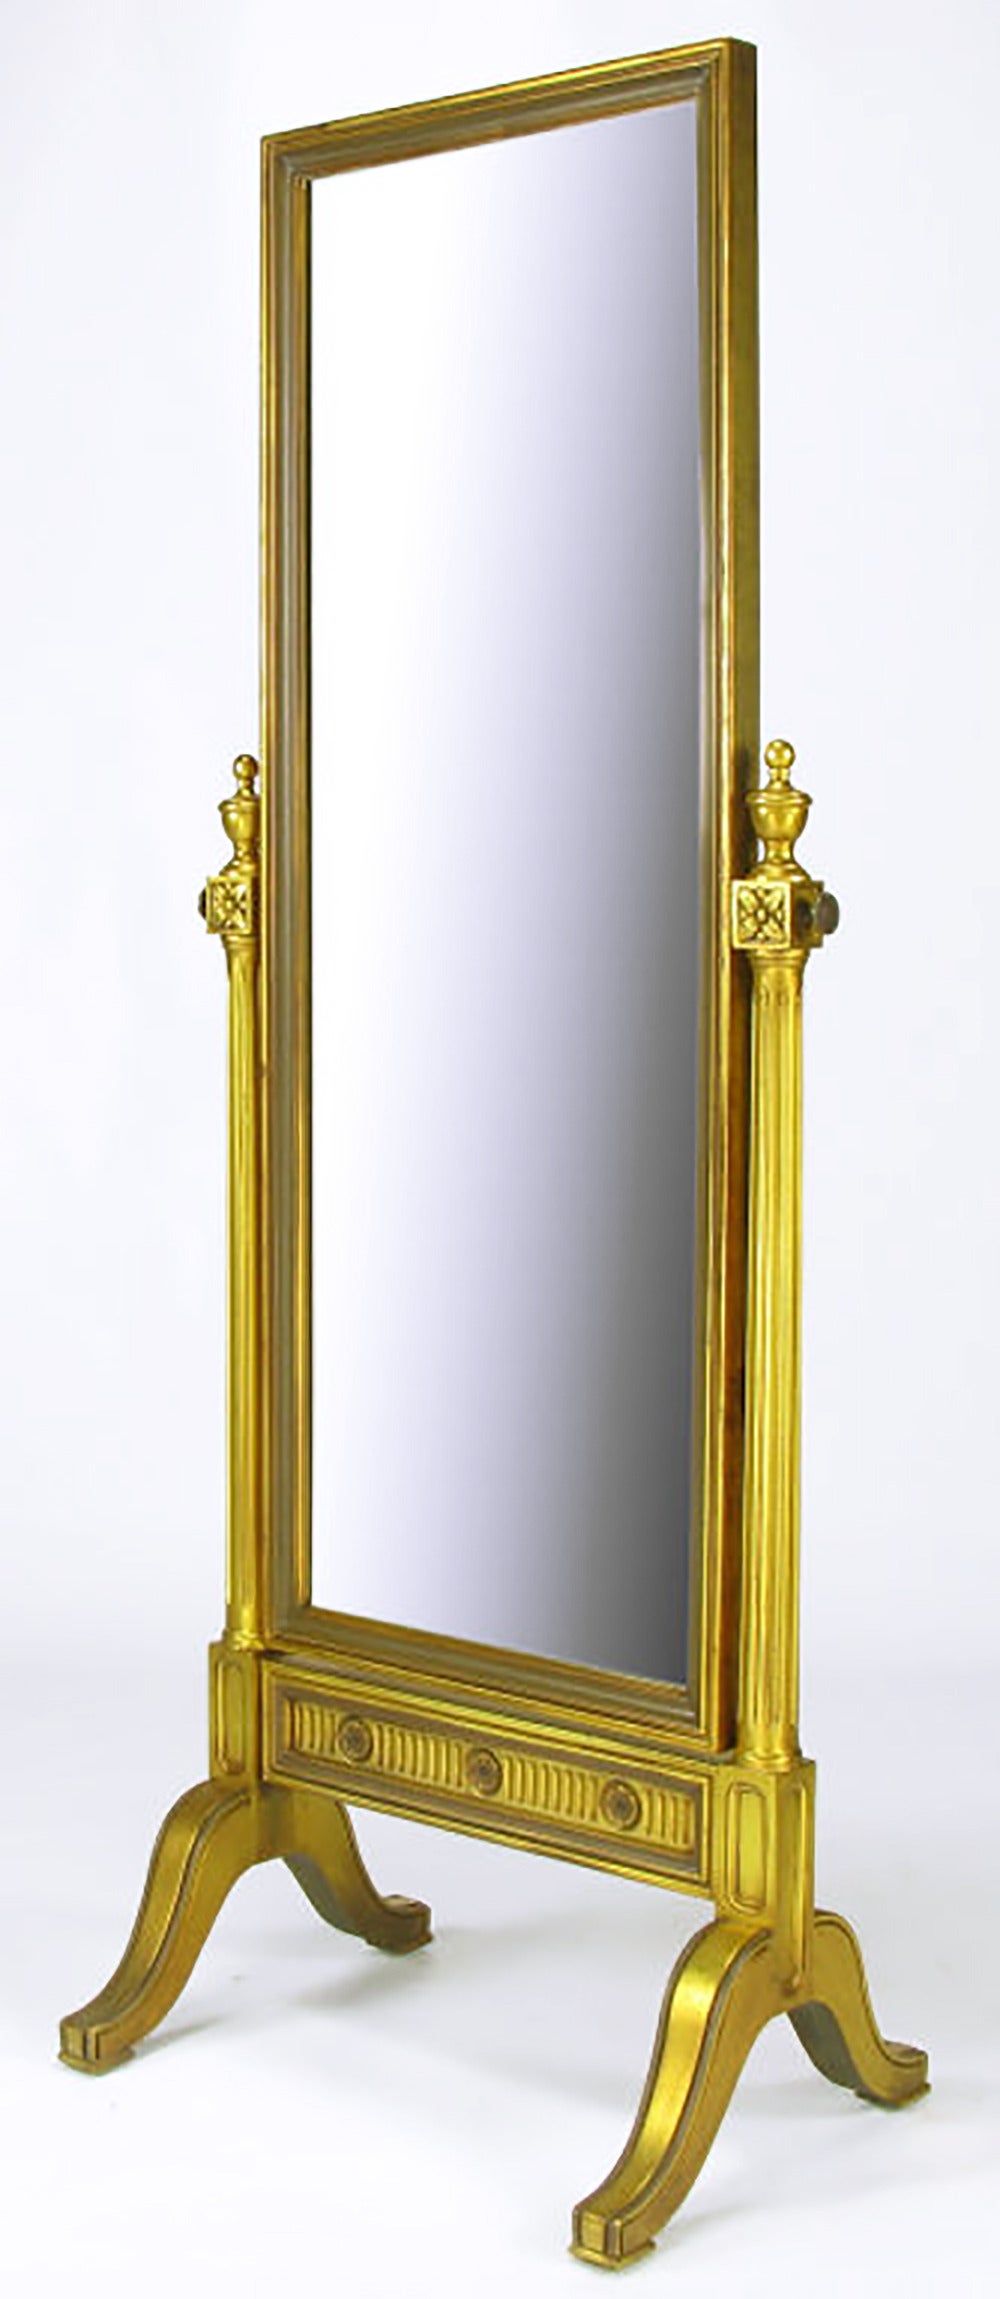 Gilt wood regency style neoclassical cheval mirror. Fluted stand, bottom panel with rosettes and finials.
Mirror itself is 52